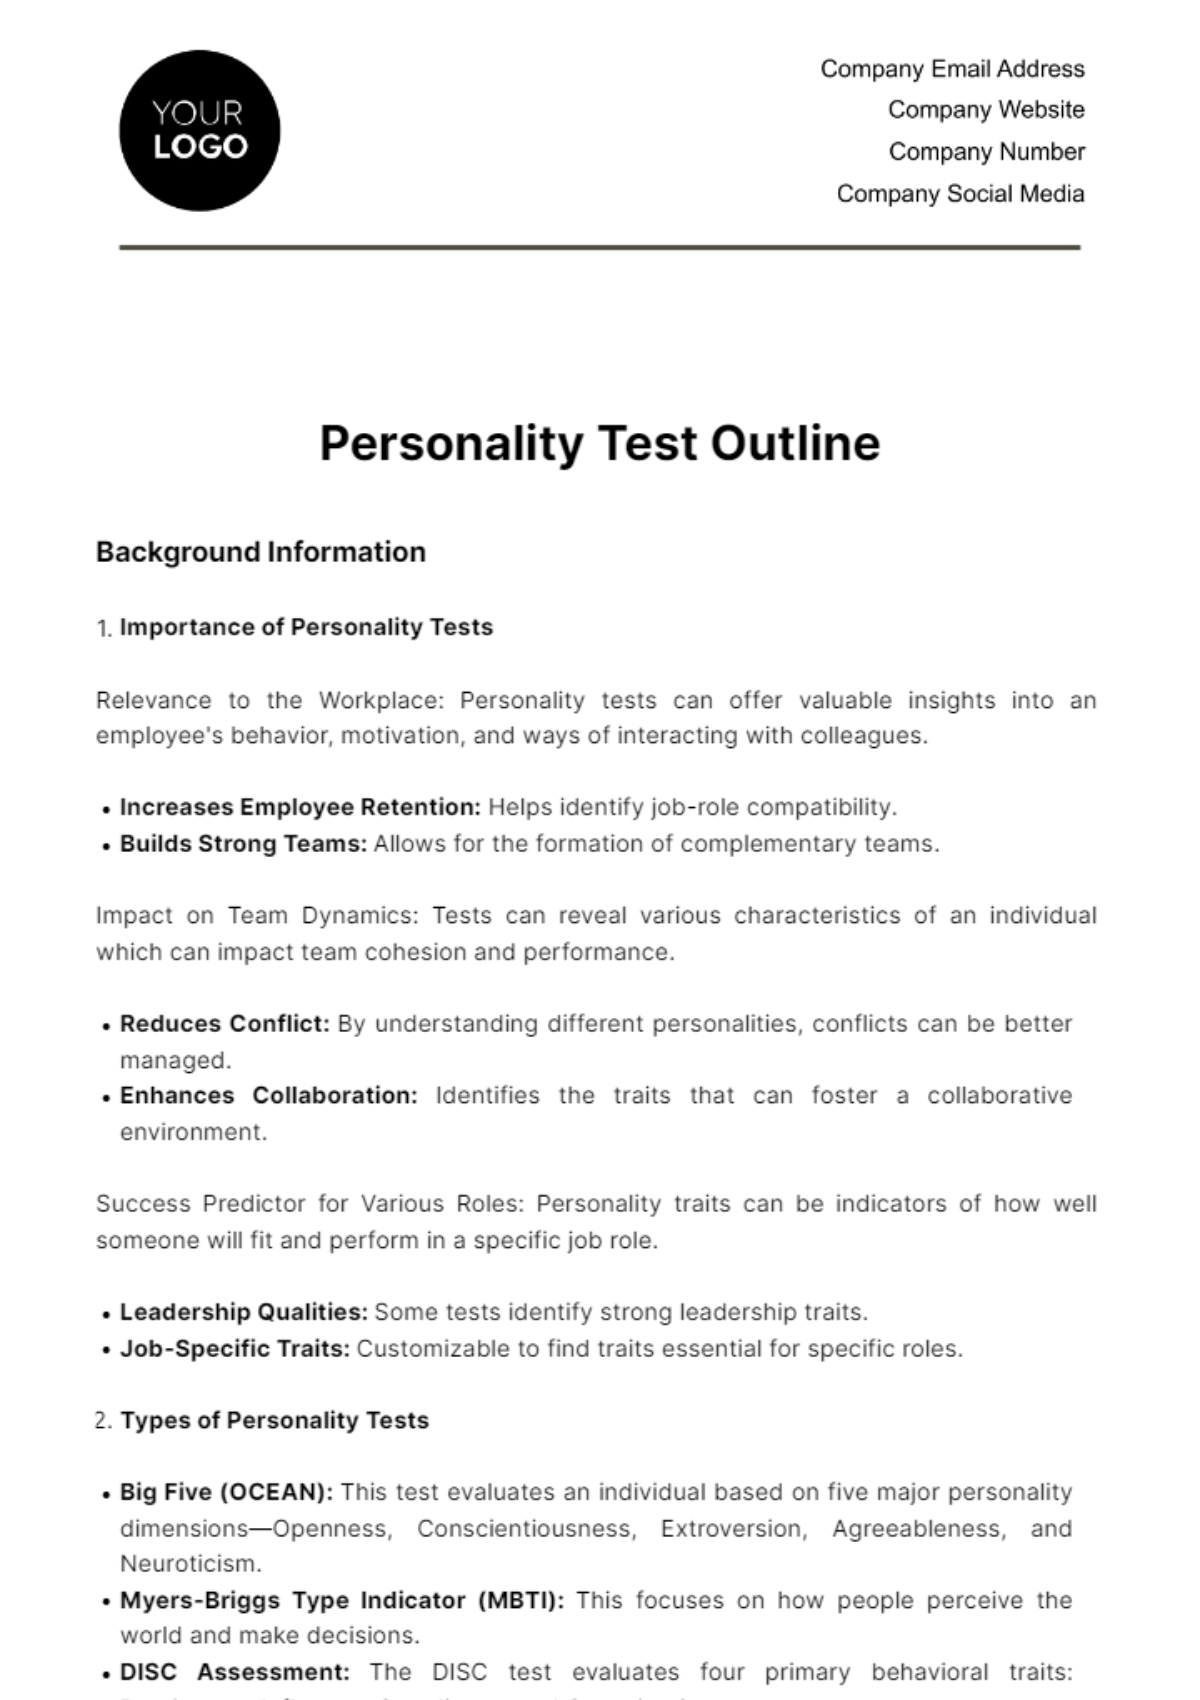 Personality Test Outline HR Template